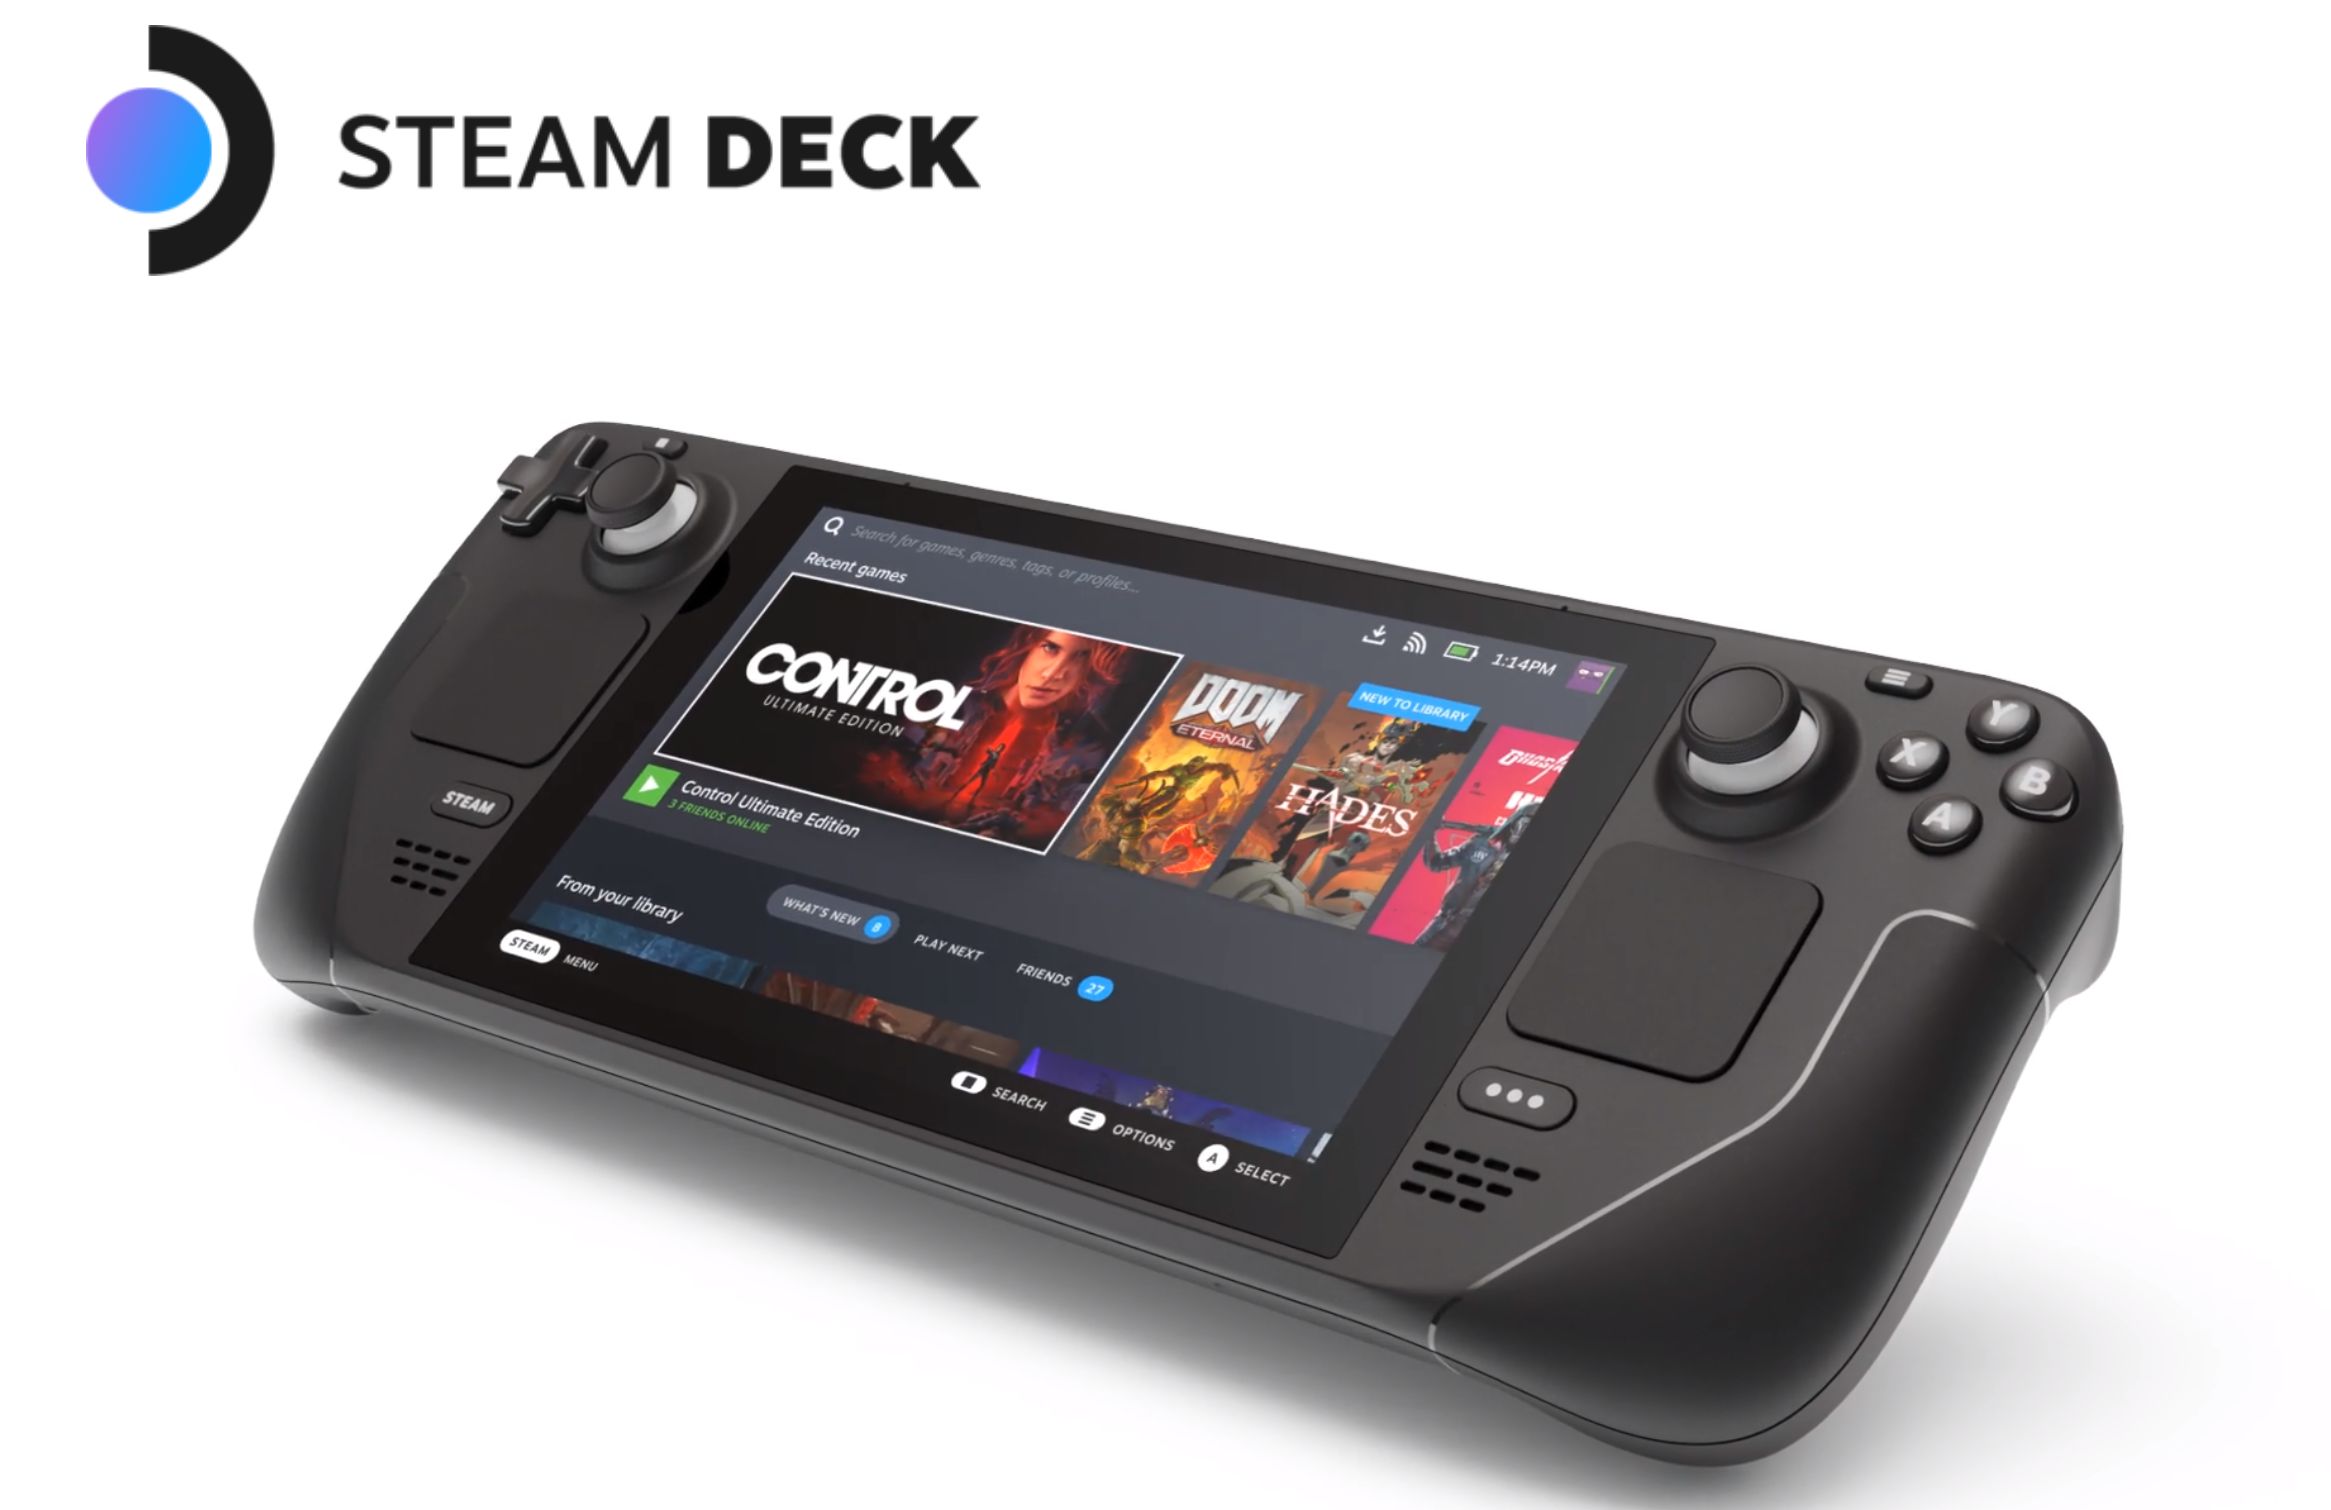 Image for Valve's handheld gaming device Steam Deck announced, starts shipping in December